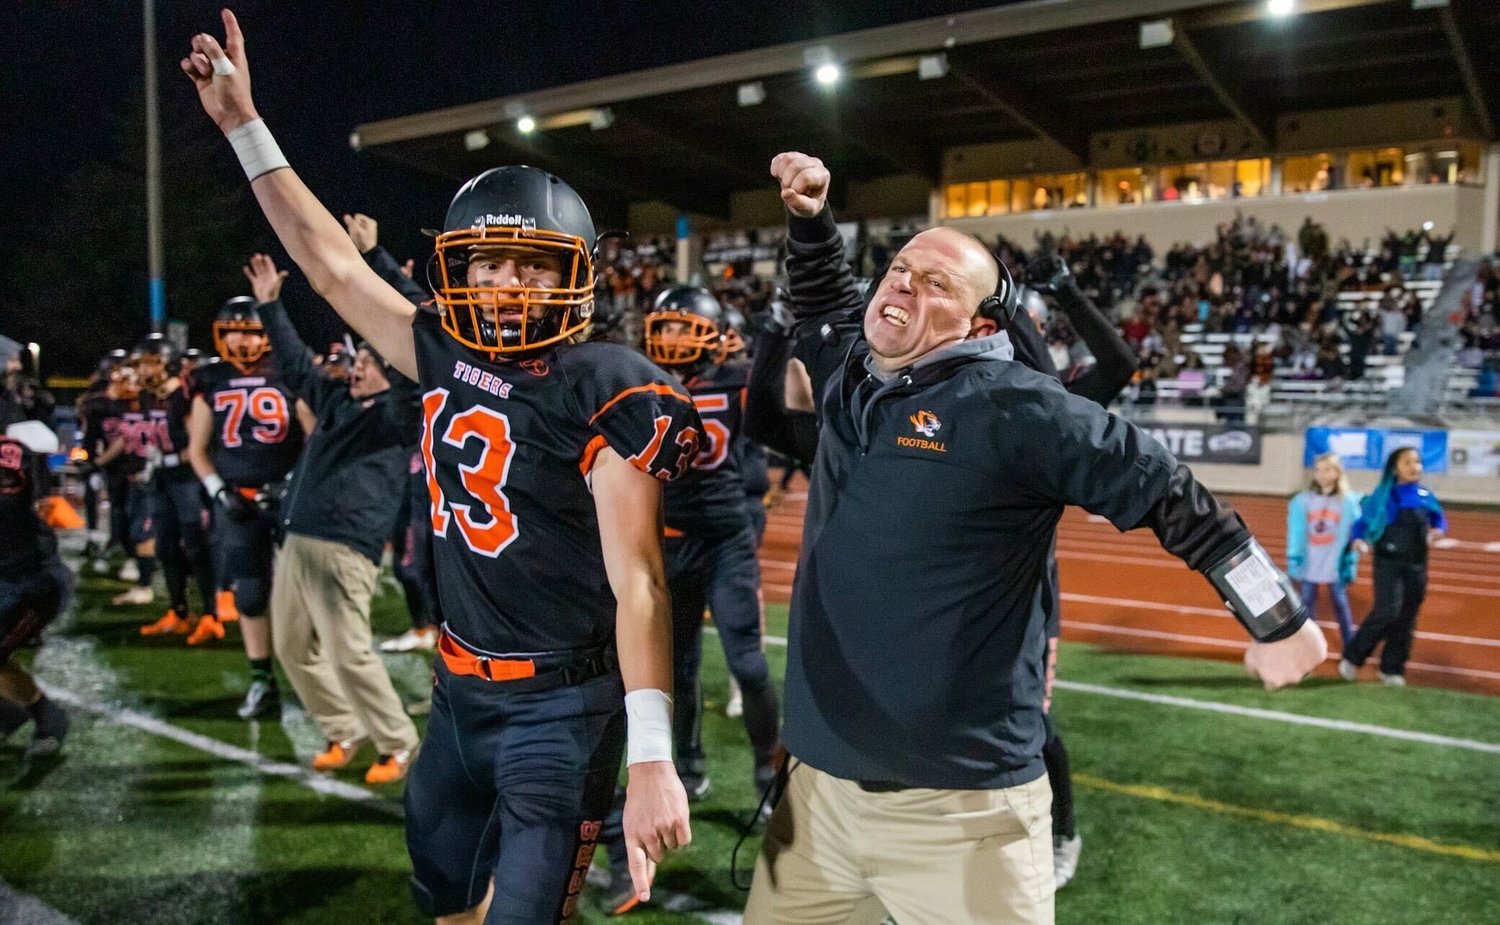 Napavine athletes and coaches celebrate Saturday night at Harry E. Lang Stadium in Lakewood during a 2B State Championship game against Okanogan.